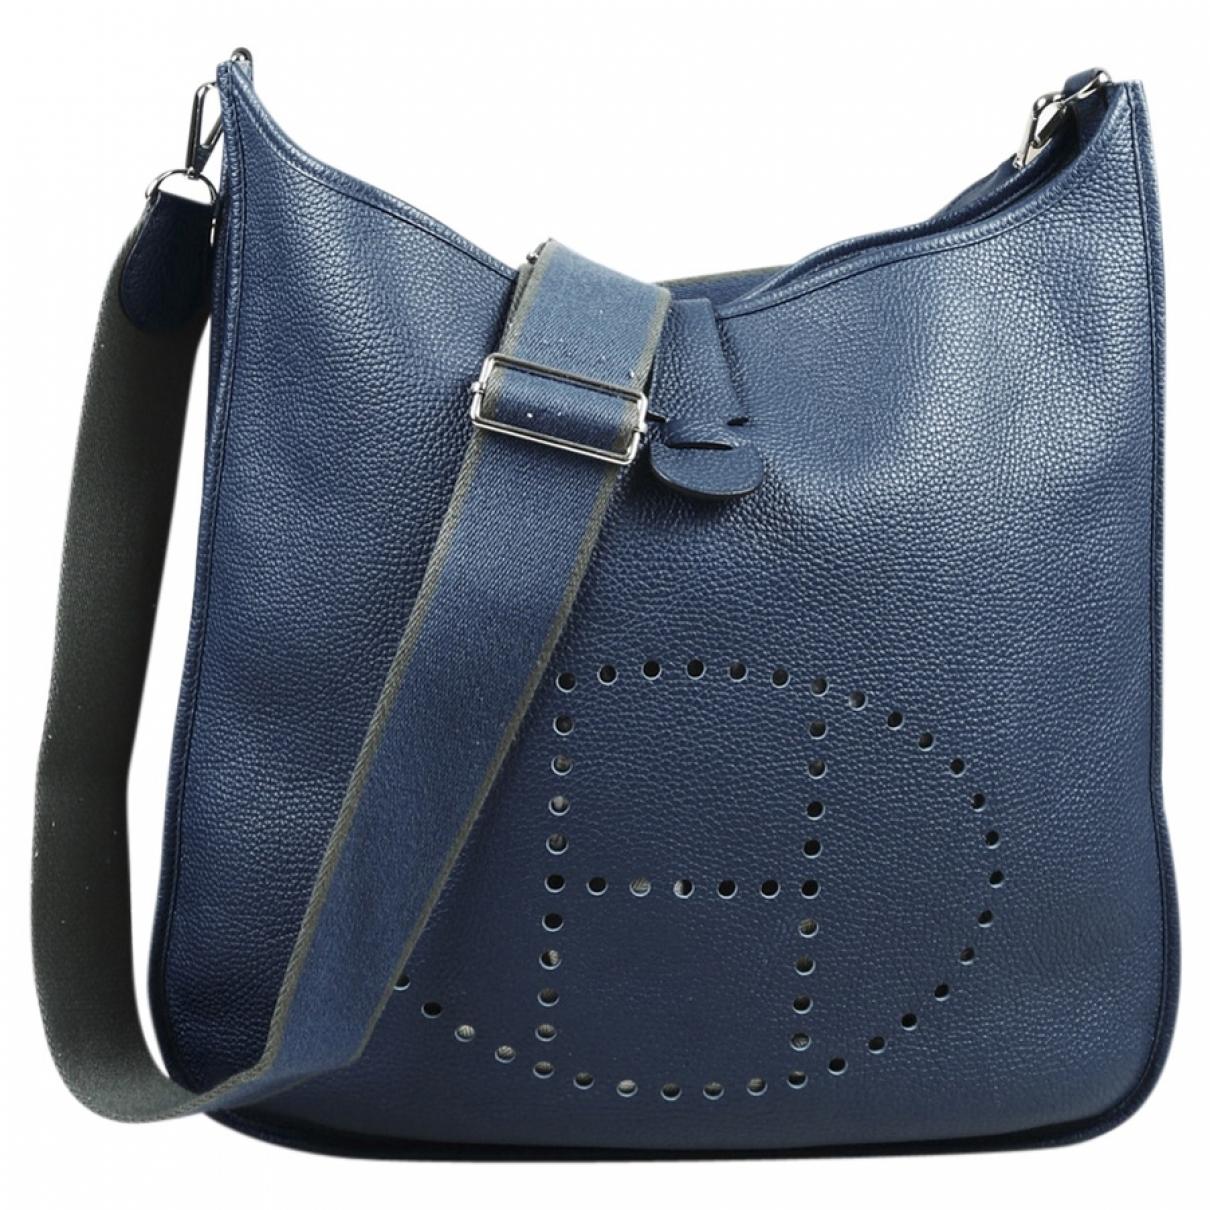 Lyst - Hermès Pre-owned Evelyne Blue Leather Handbags in Blue